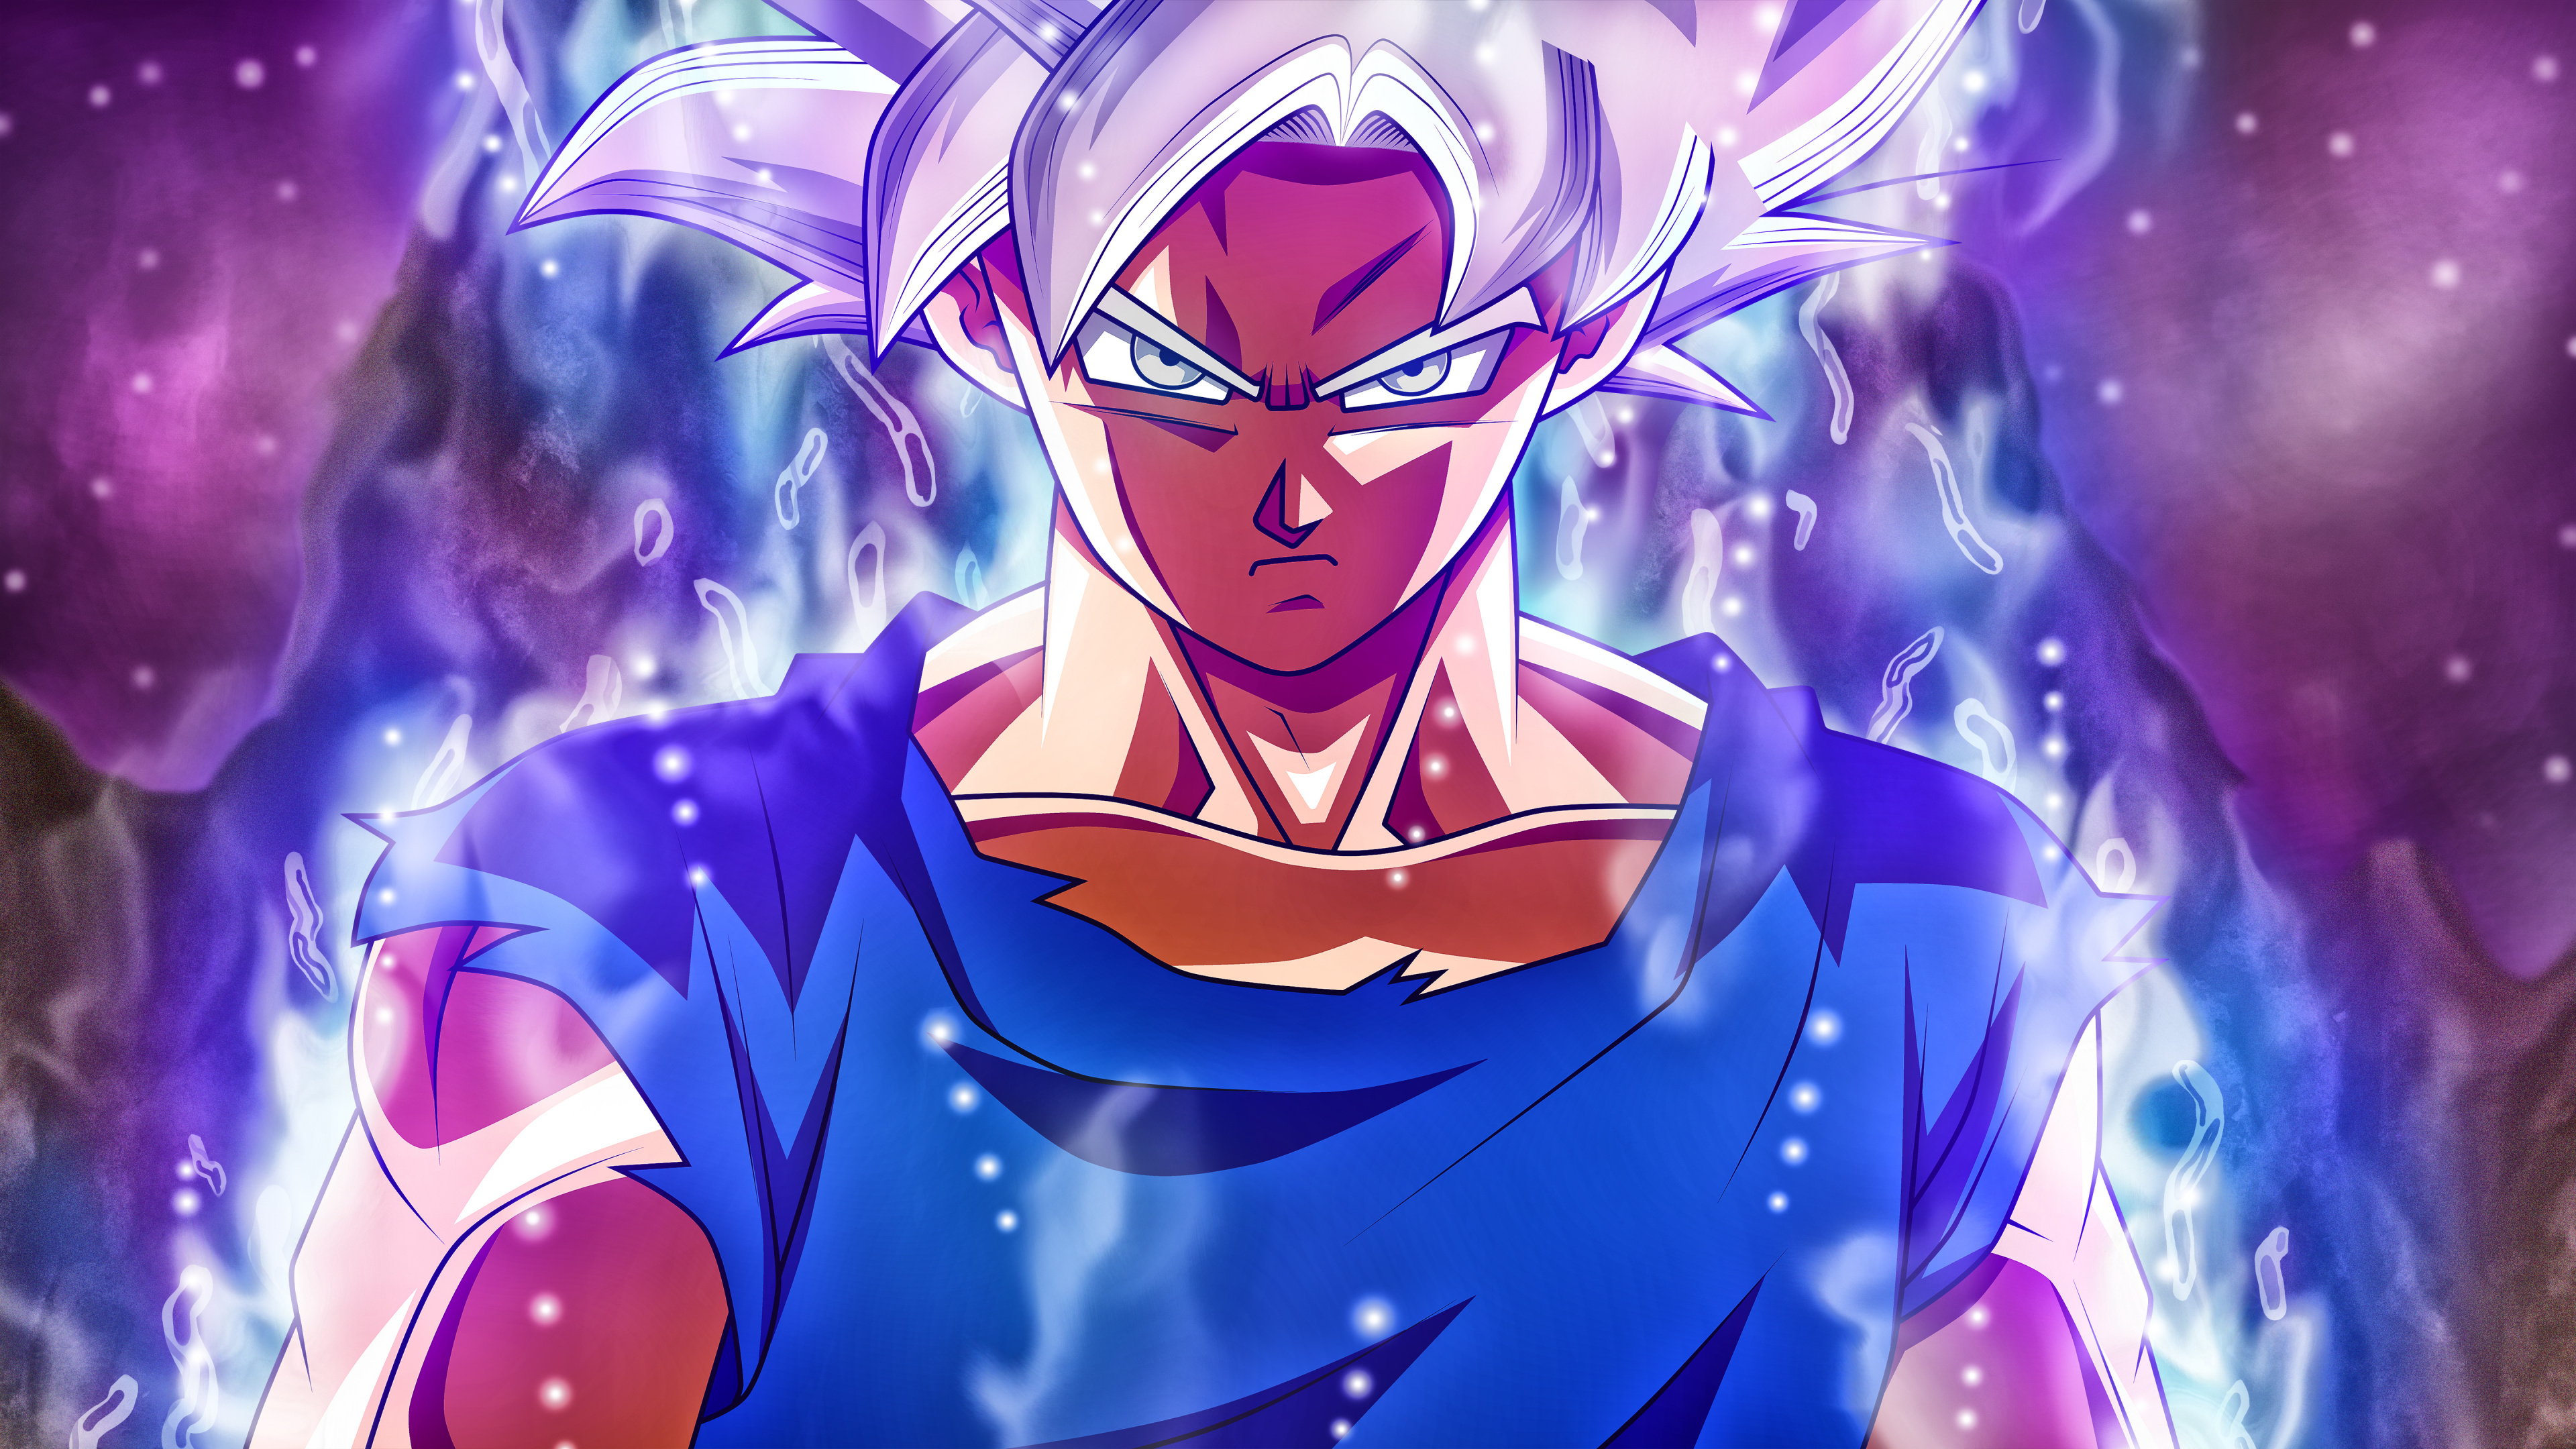 Personnage D'anime Masculin Aux Cheveux Bleus. Wallpaper in 3840x2160 Resolution